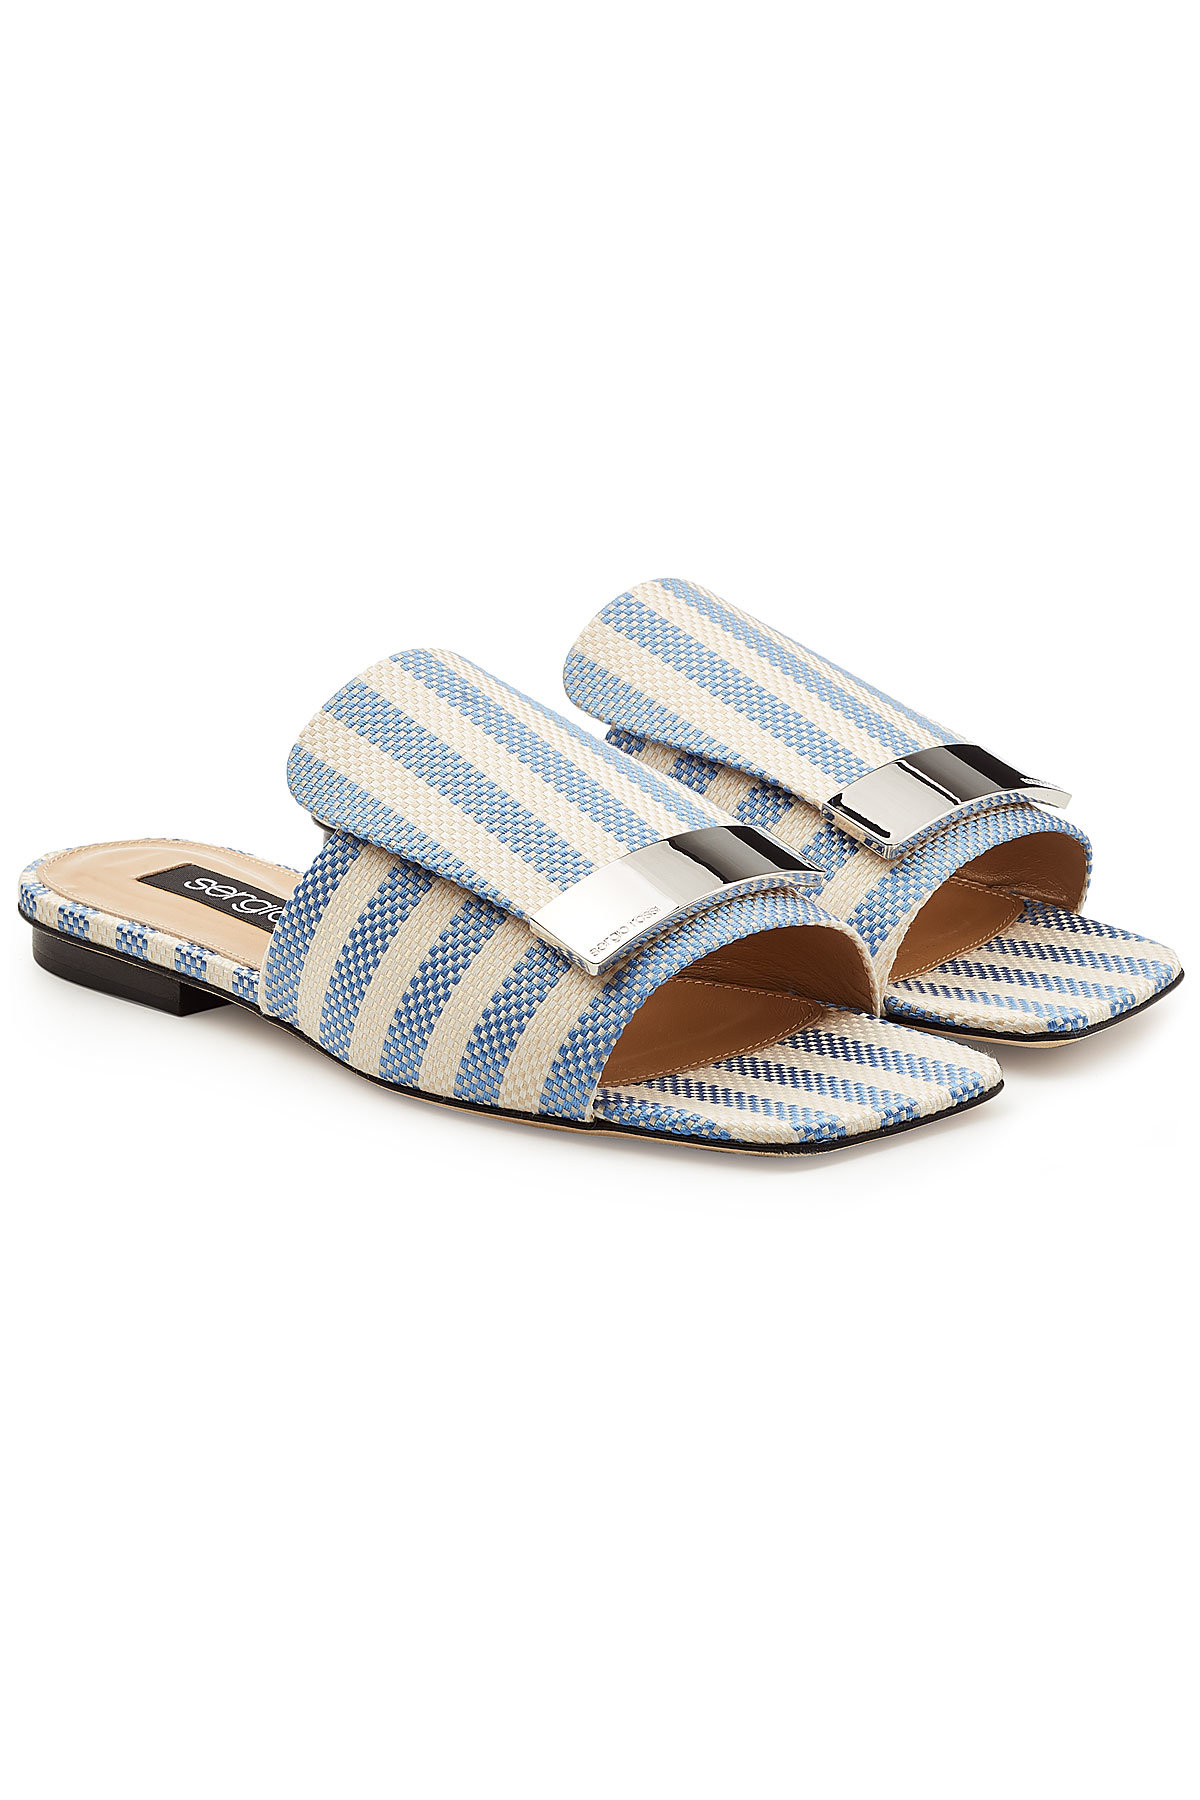 Slip-On Fabric Sandals by Sergio Rossi